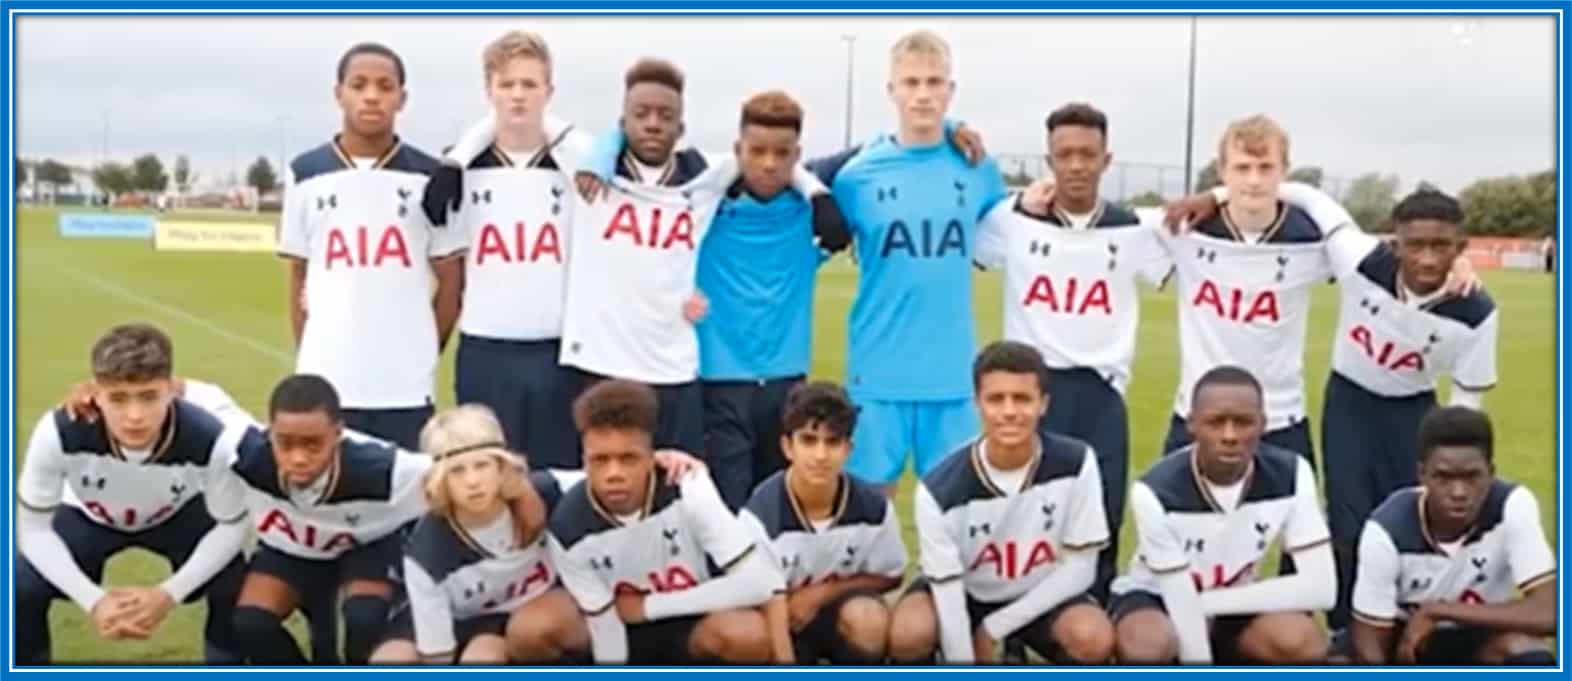 Oliver Skipp joined Spurs Academy in 2013, pictured here with teammates in his early days. Can you find him in this photo?